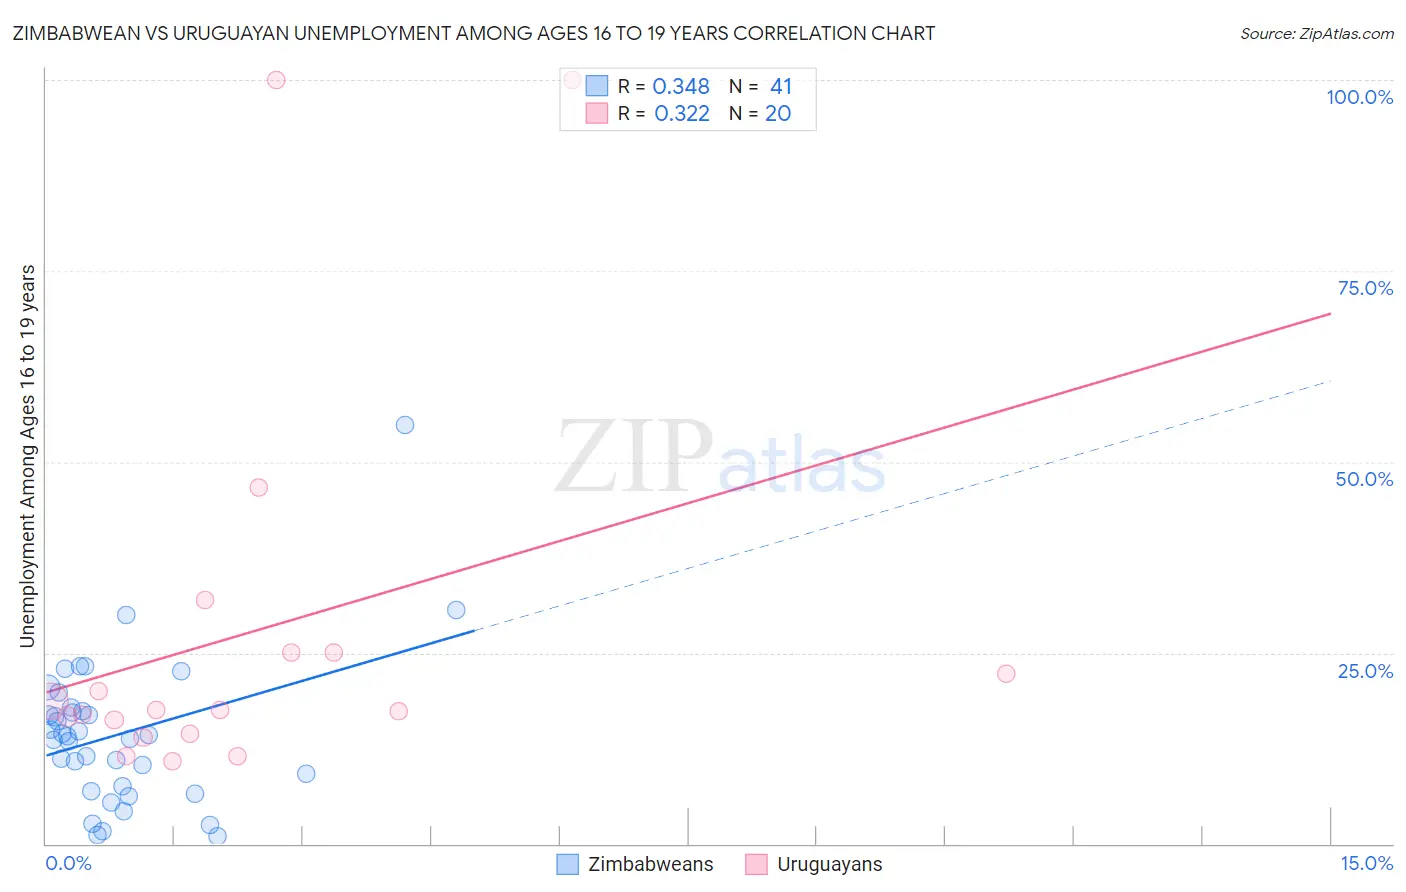 Zimbabwean vs Uruguayan Unemployment Among Ages 16 to 19 years